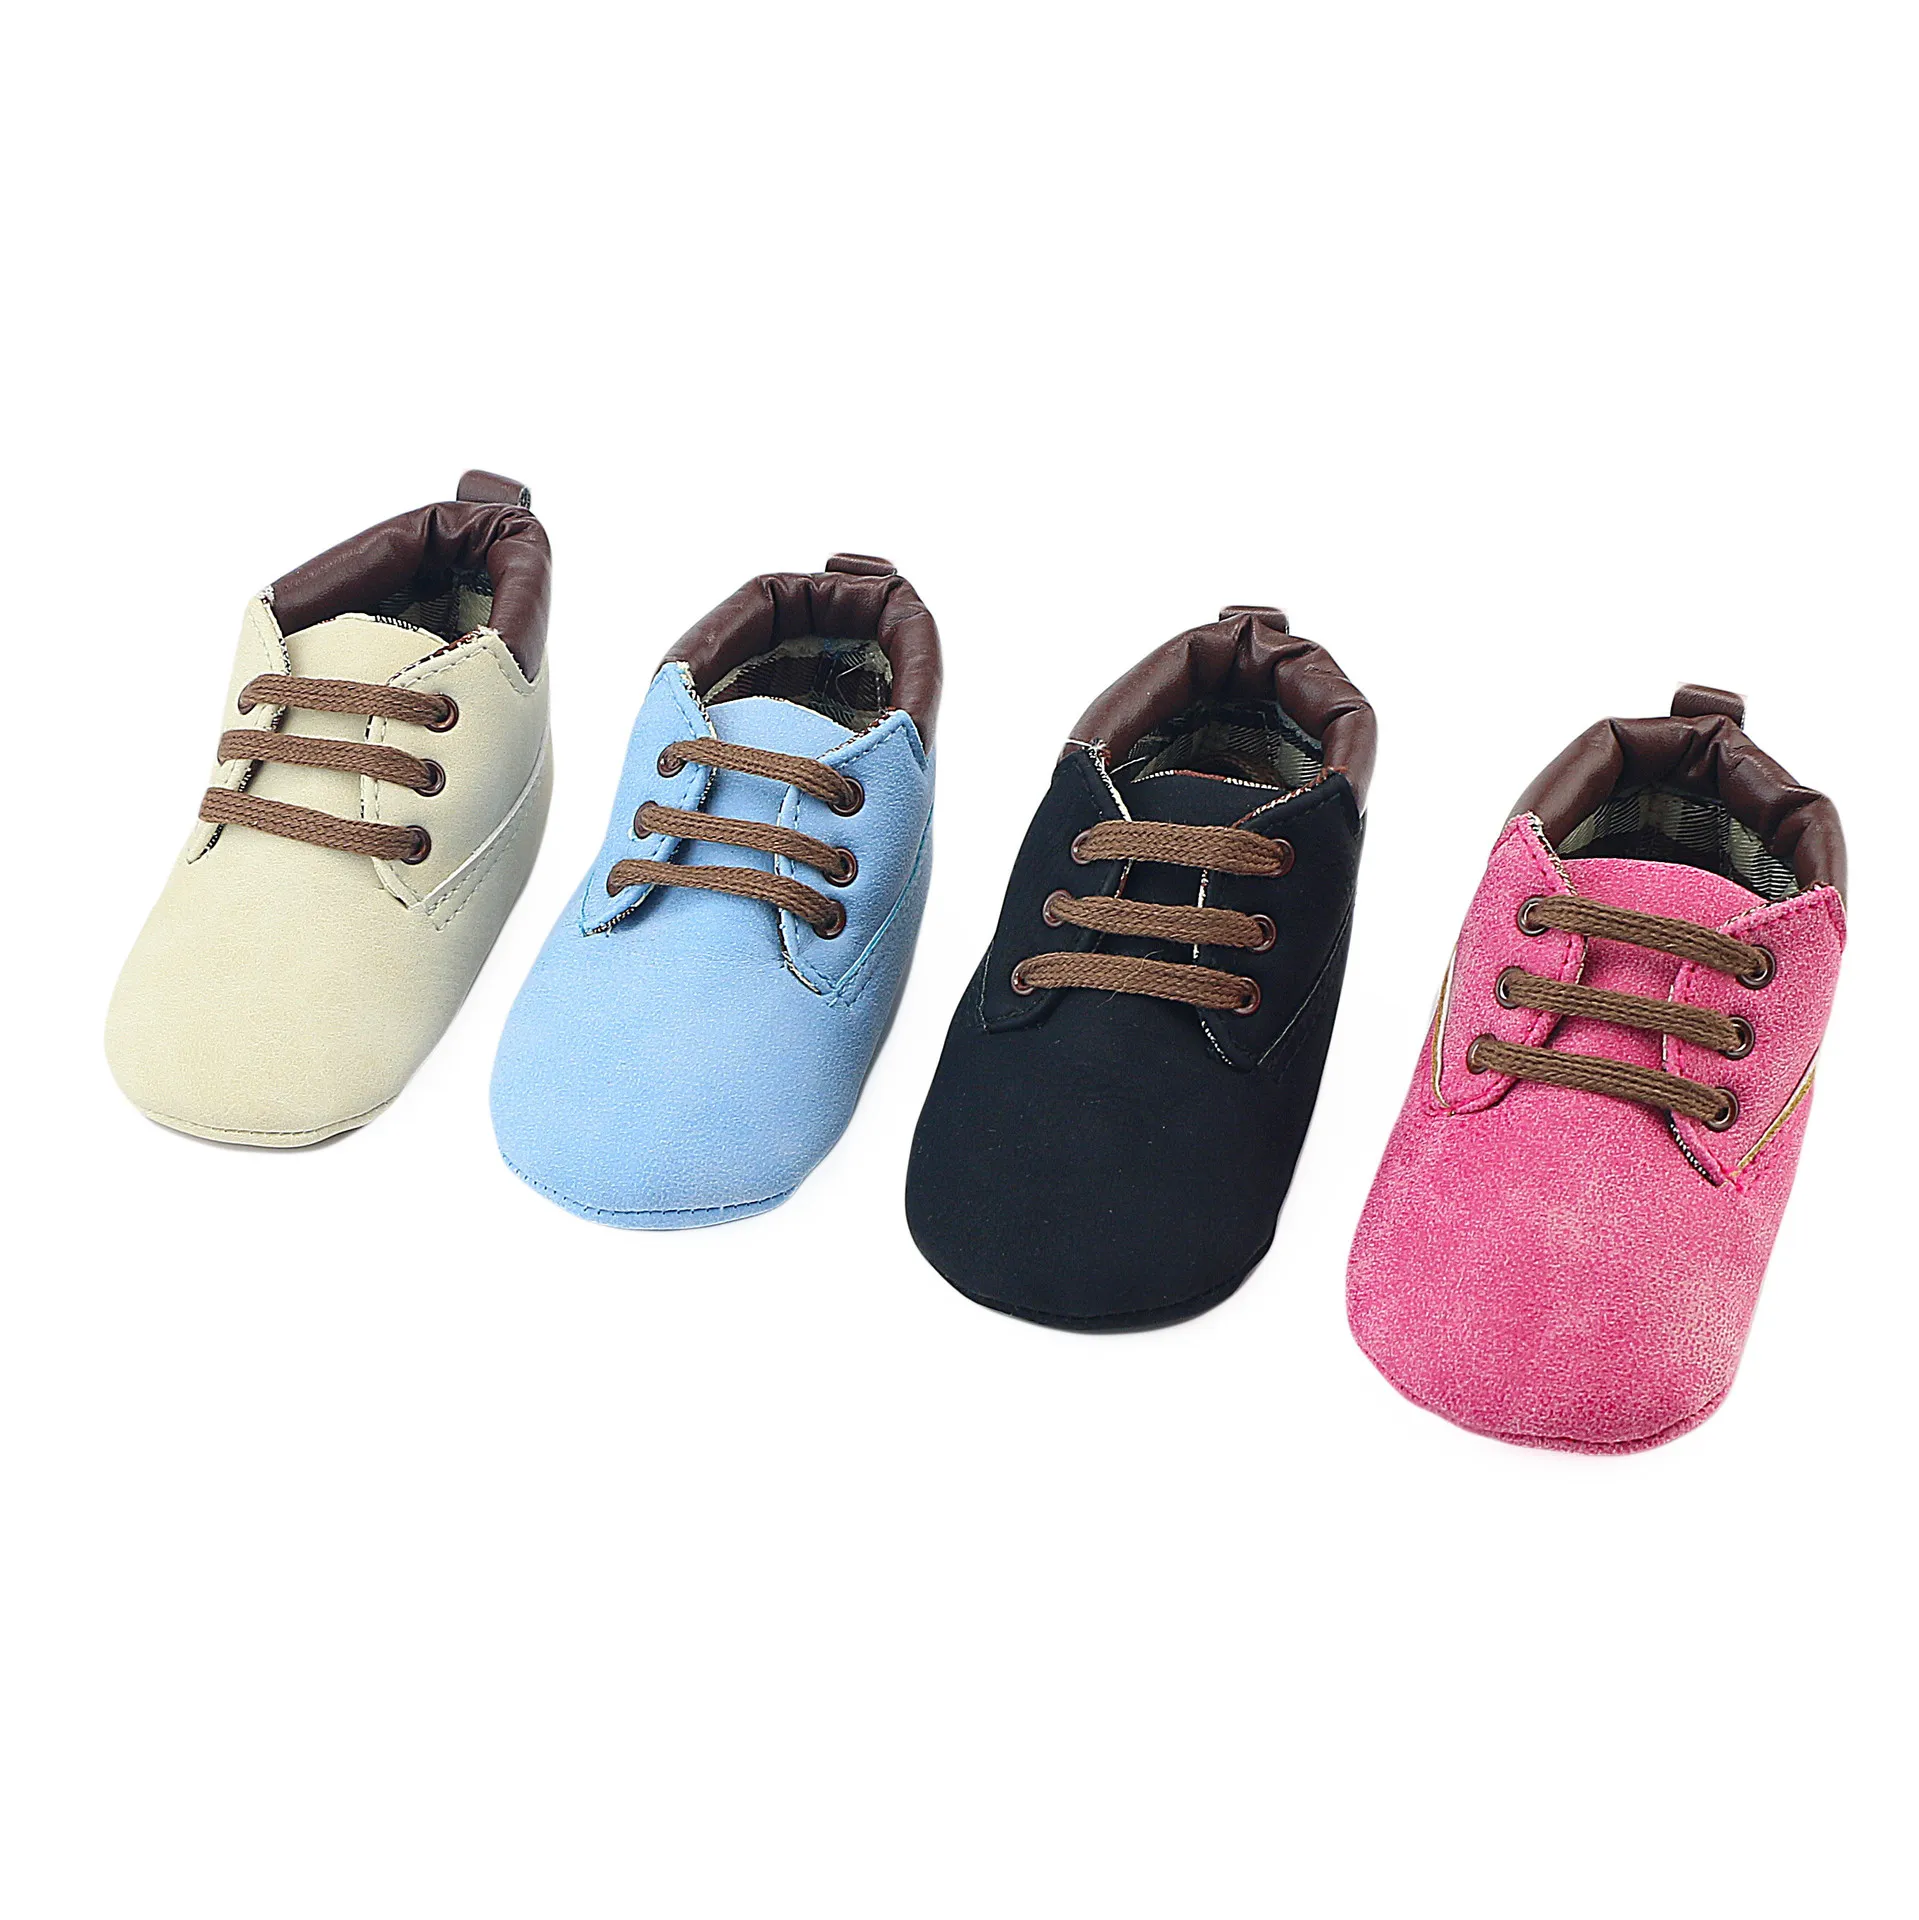 Prettybaby Baby Comfortable Soft PU Sole High-Tops Little Kids First Walker Toddler Footwear Infant Winter Boots Baby Shoes